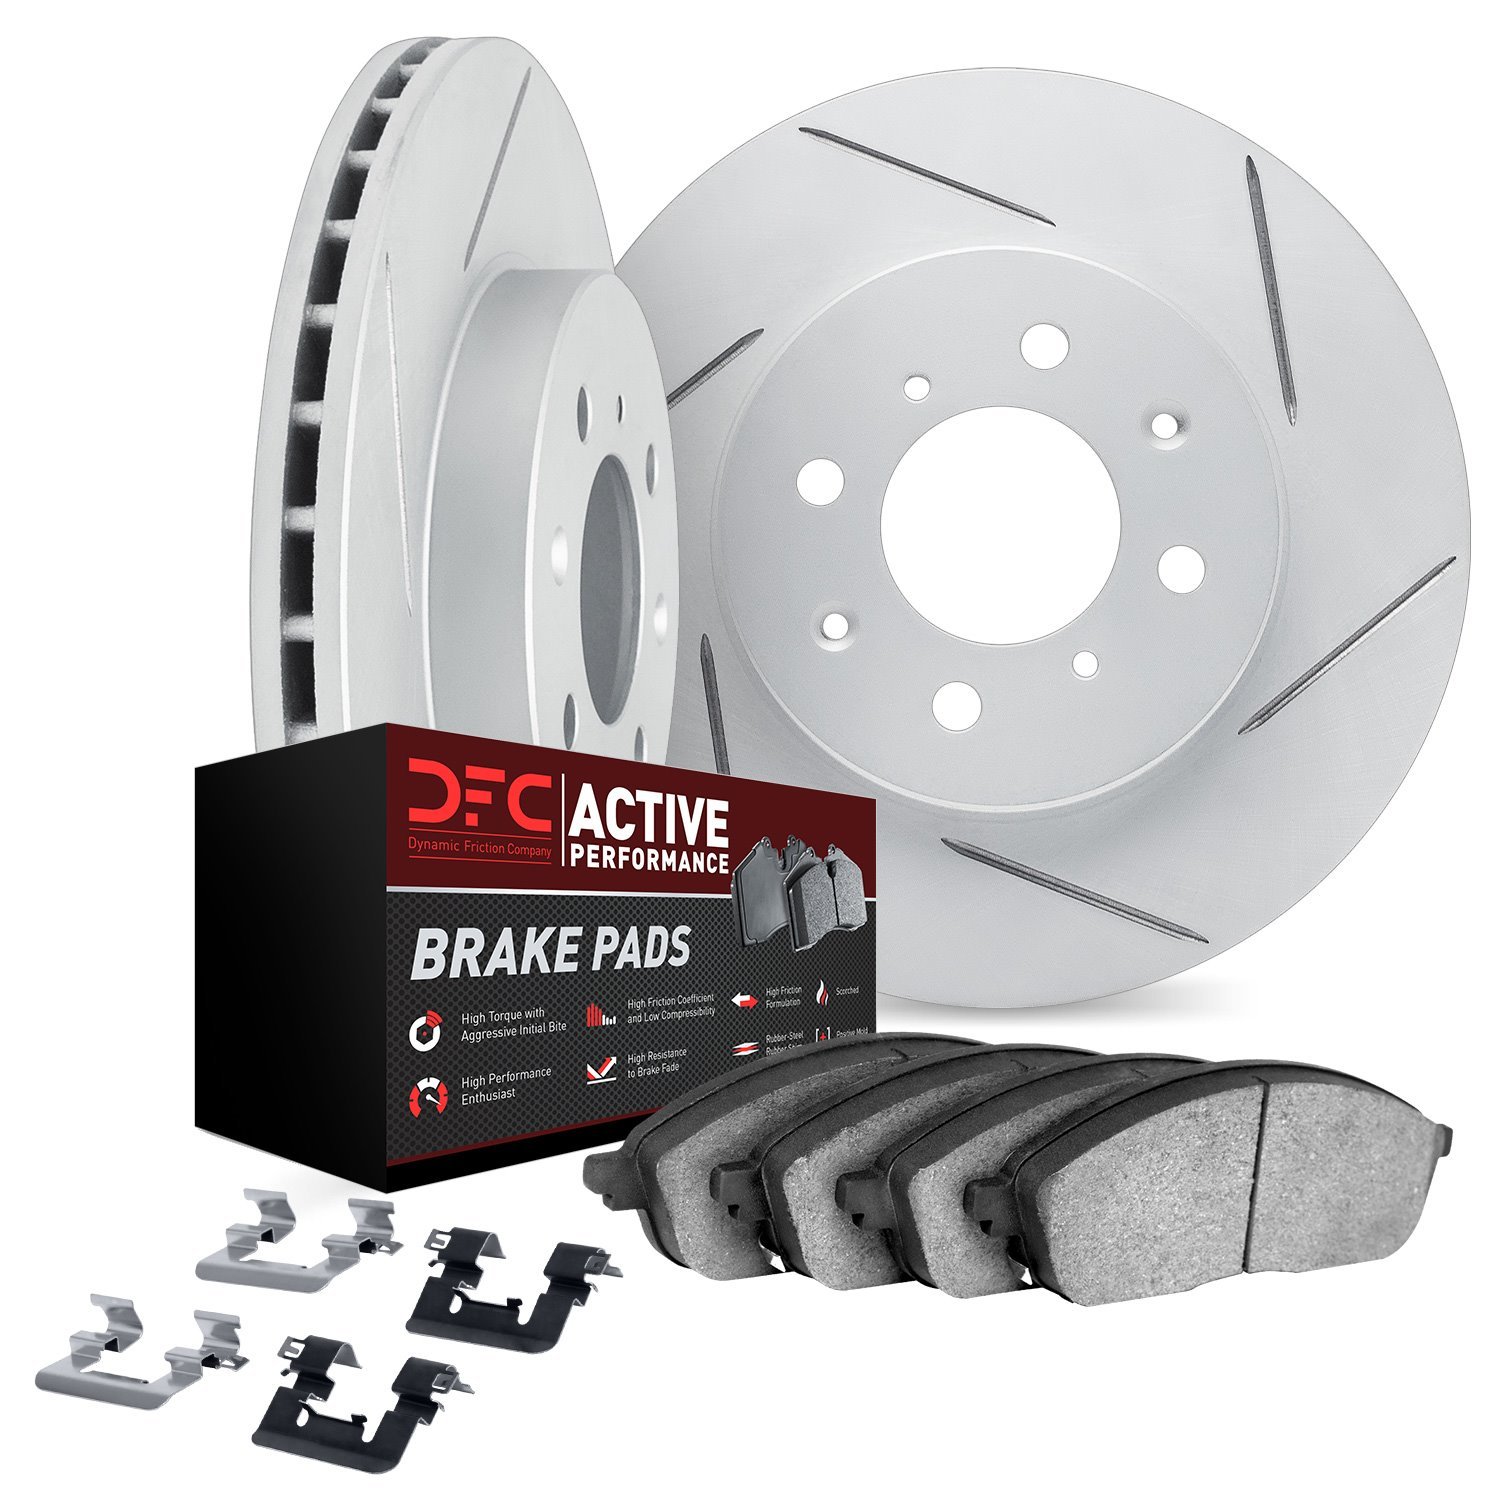 2712-59011 Geoperformance Slotted Brake Rotors with Active Performance Pads Kits & Hardware, 2009-2014 Acura/Honda, Position: Fr